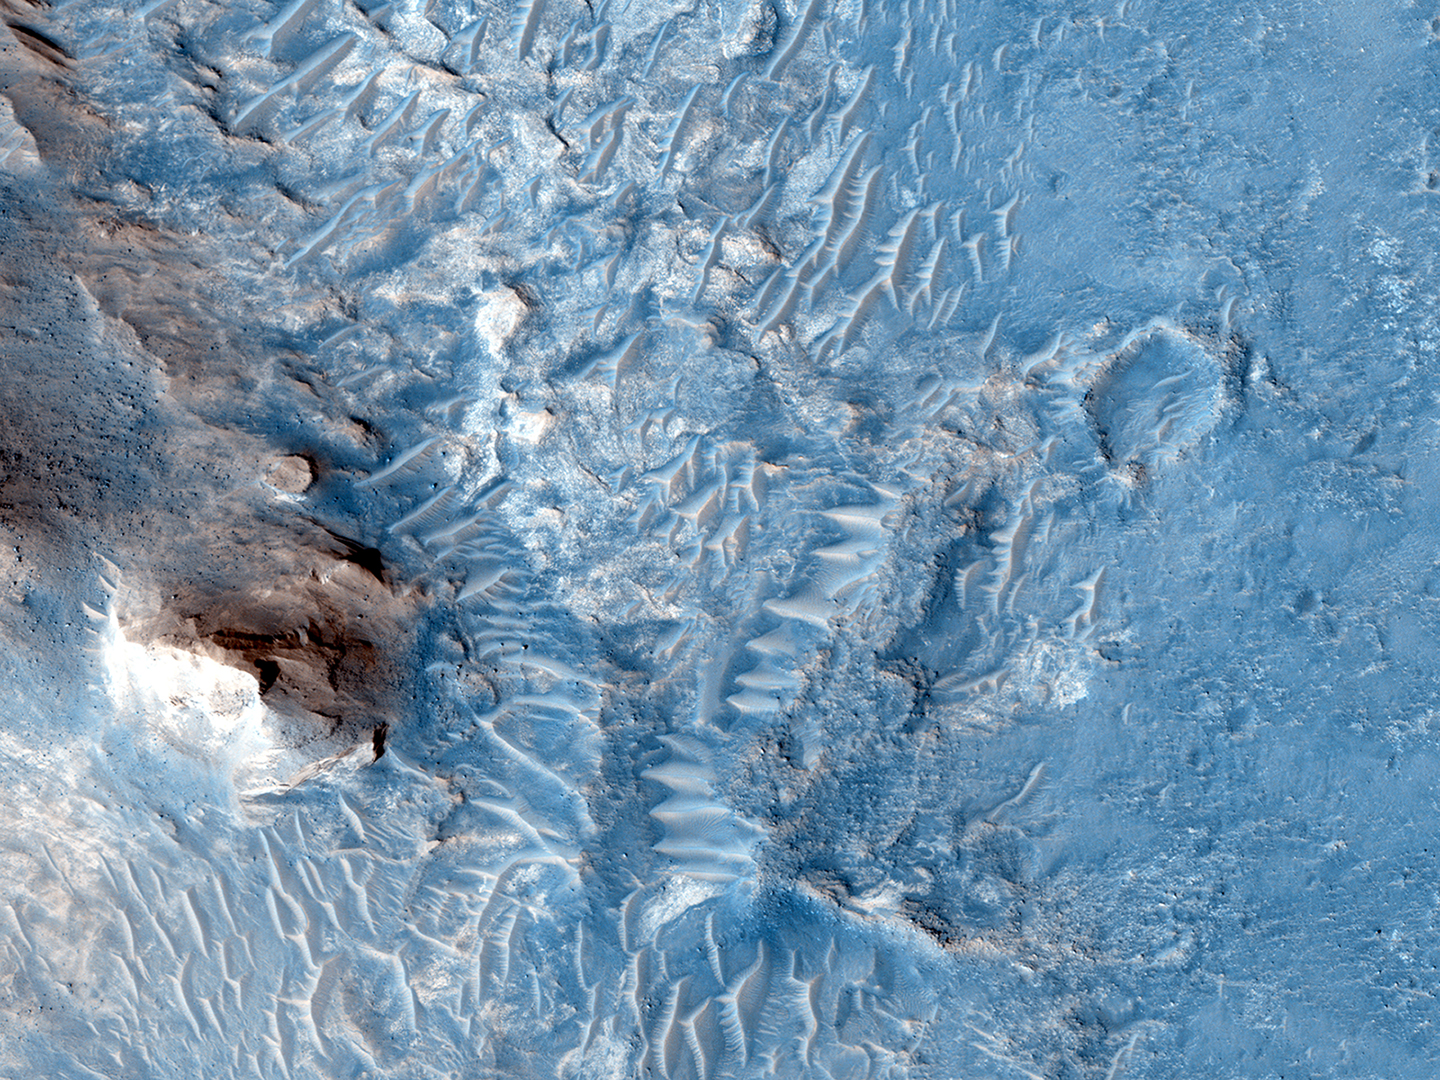 Hirise Ridges And A Valley With Flow Fronts Esp